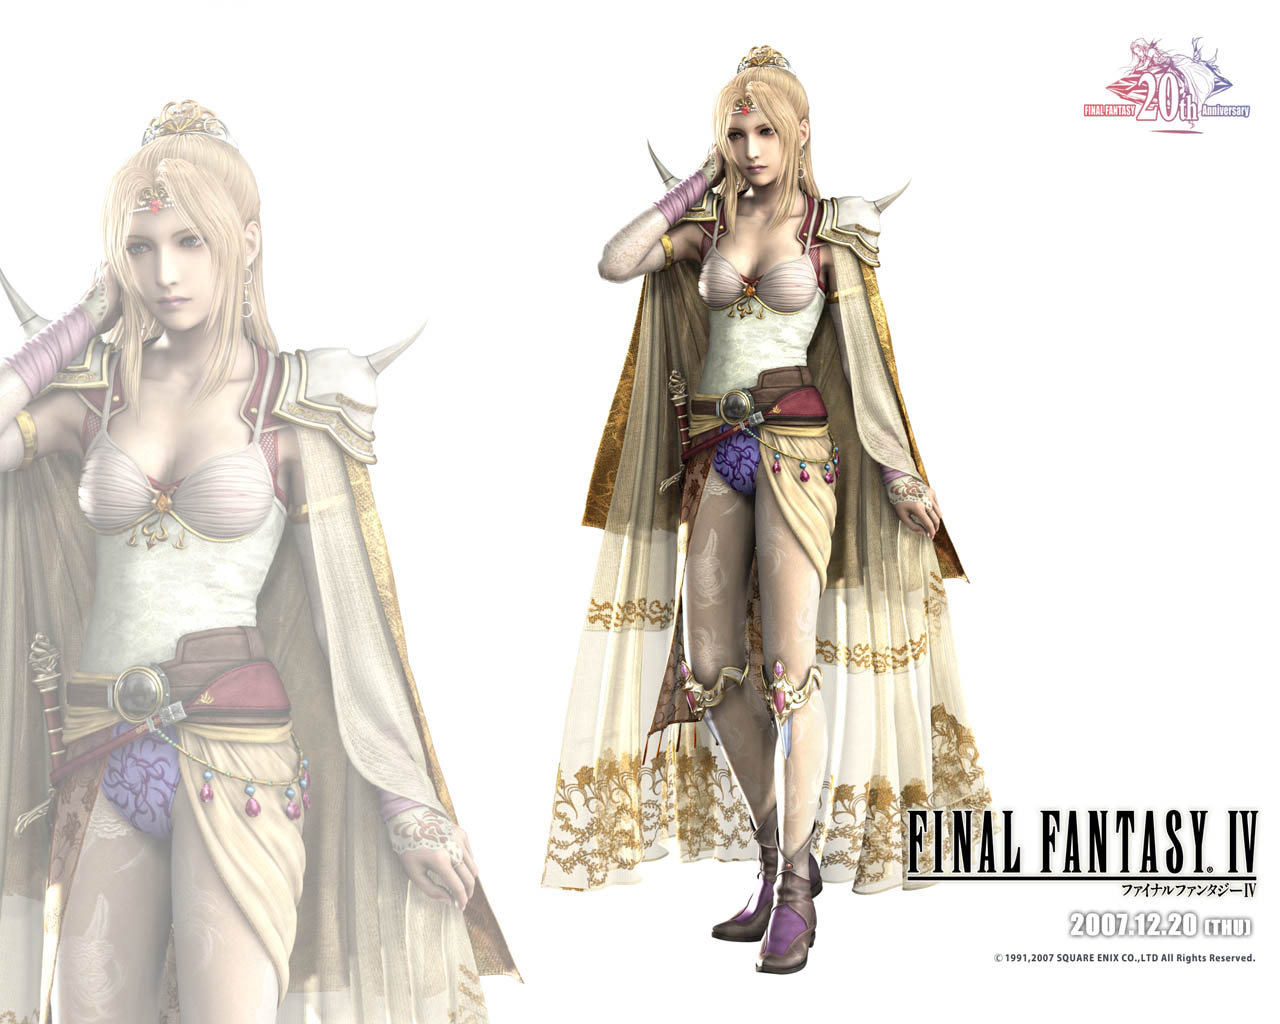 1280x1024 > Final Fantasy IV Wallpapers